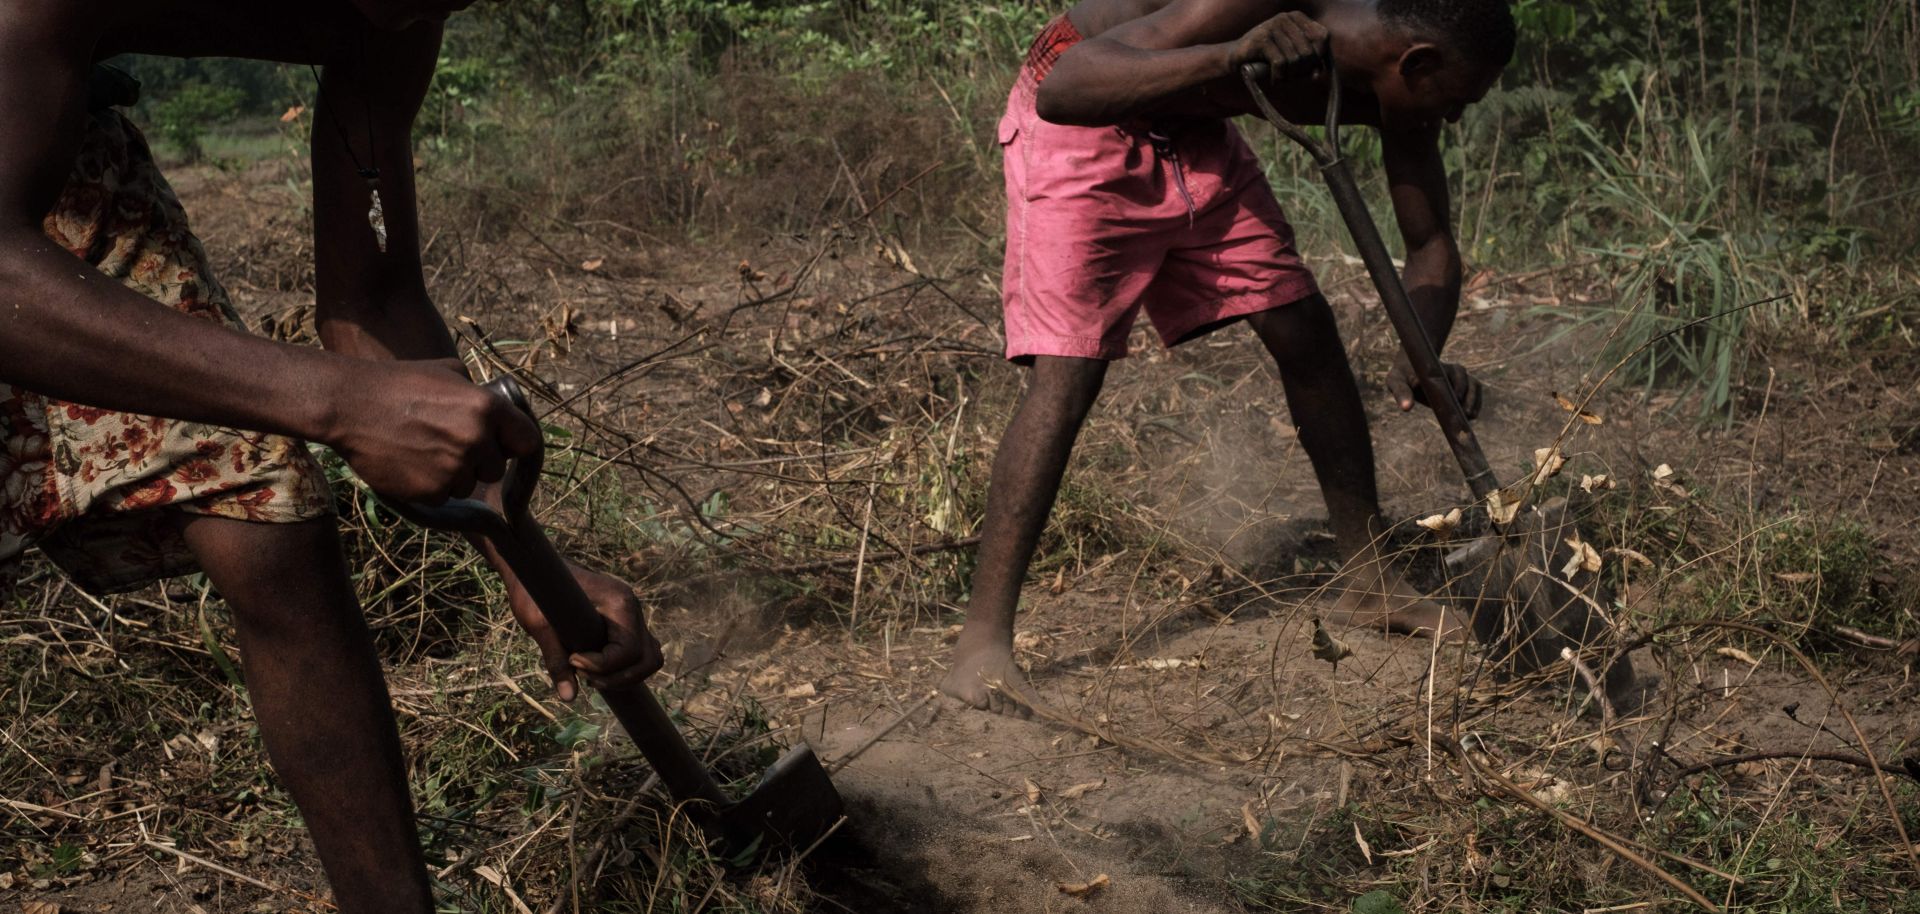 Workers clear land for cassava planting near the village of K-Dere near Bodo, part of the Niger Delta region in Nigeria.